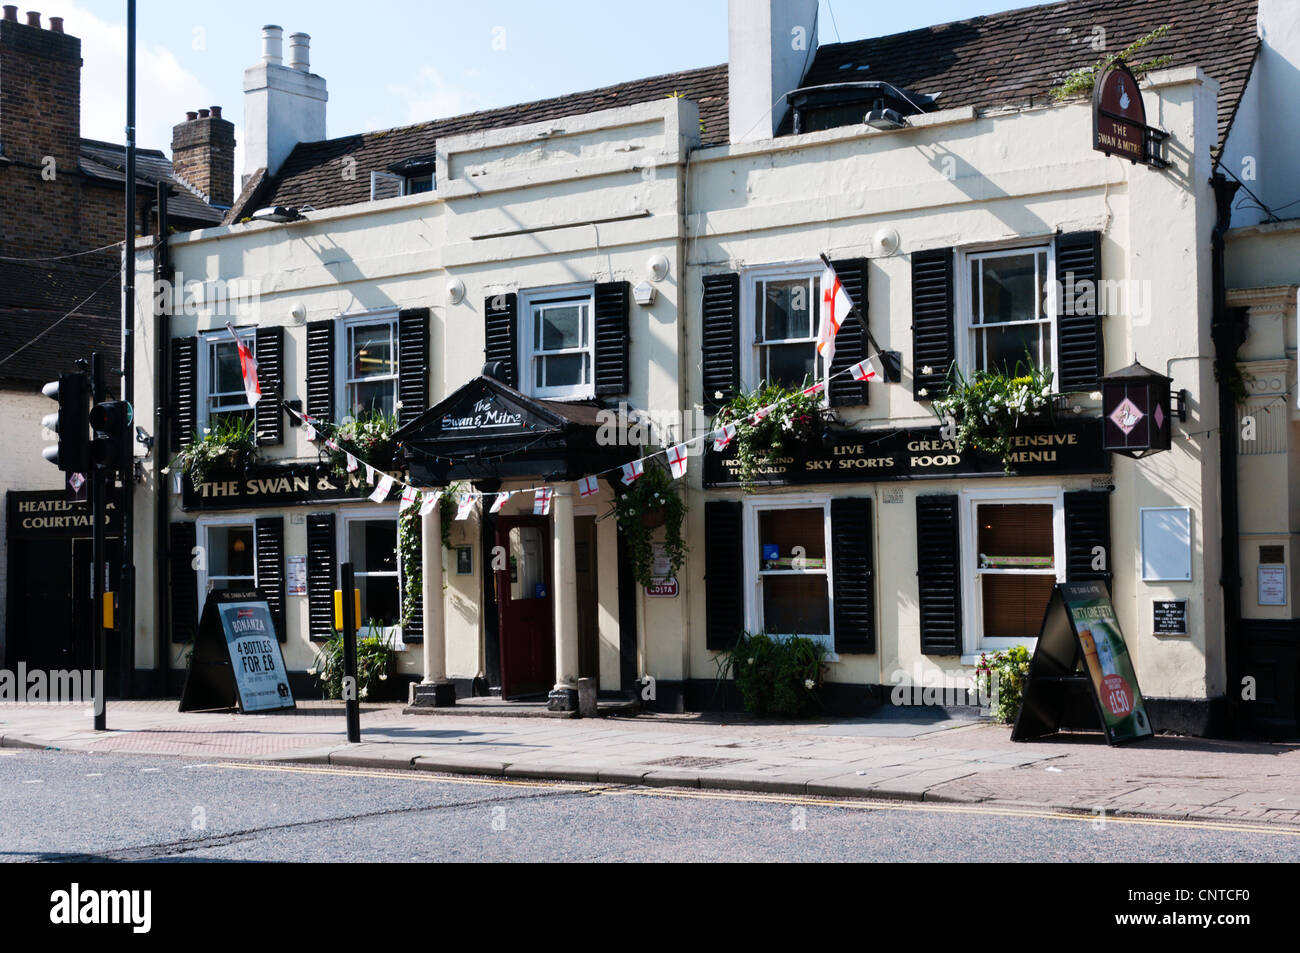 The Swan and Mitre public house in Bromley High Street, Kent. Stock Photo